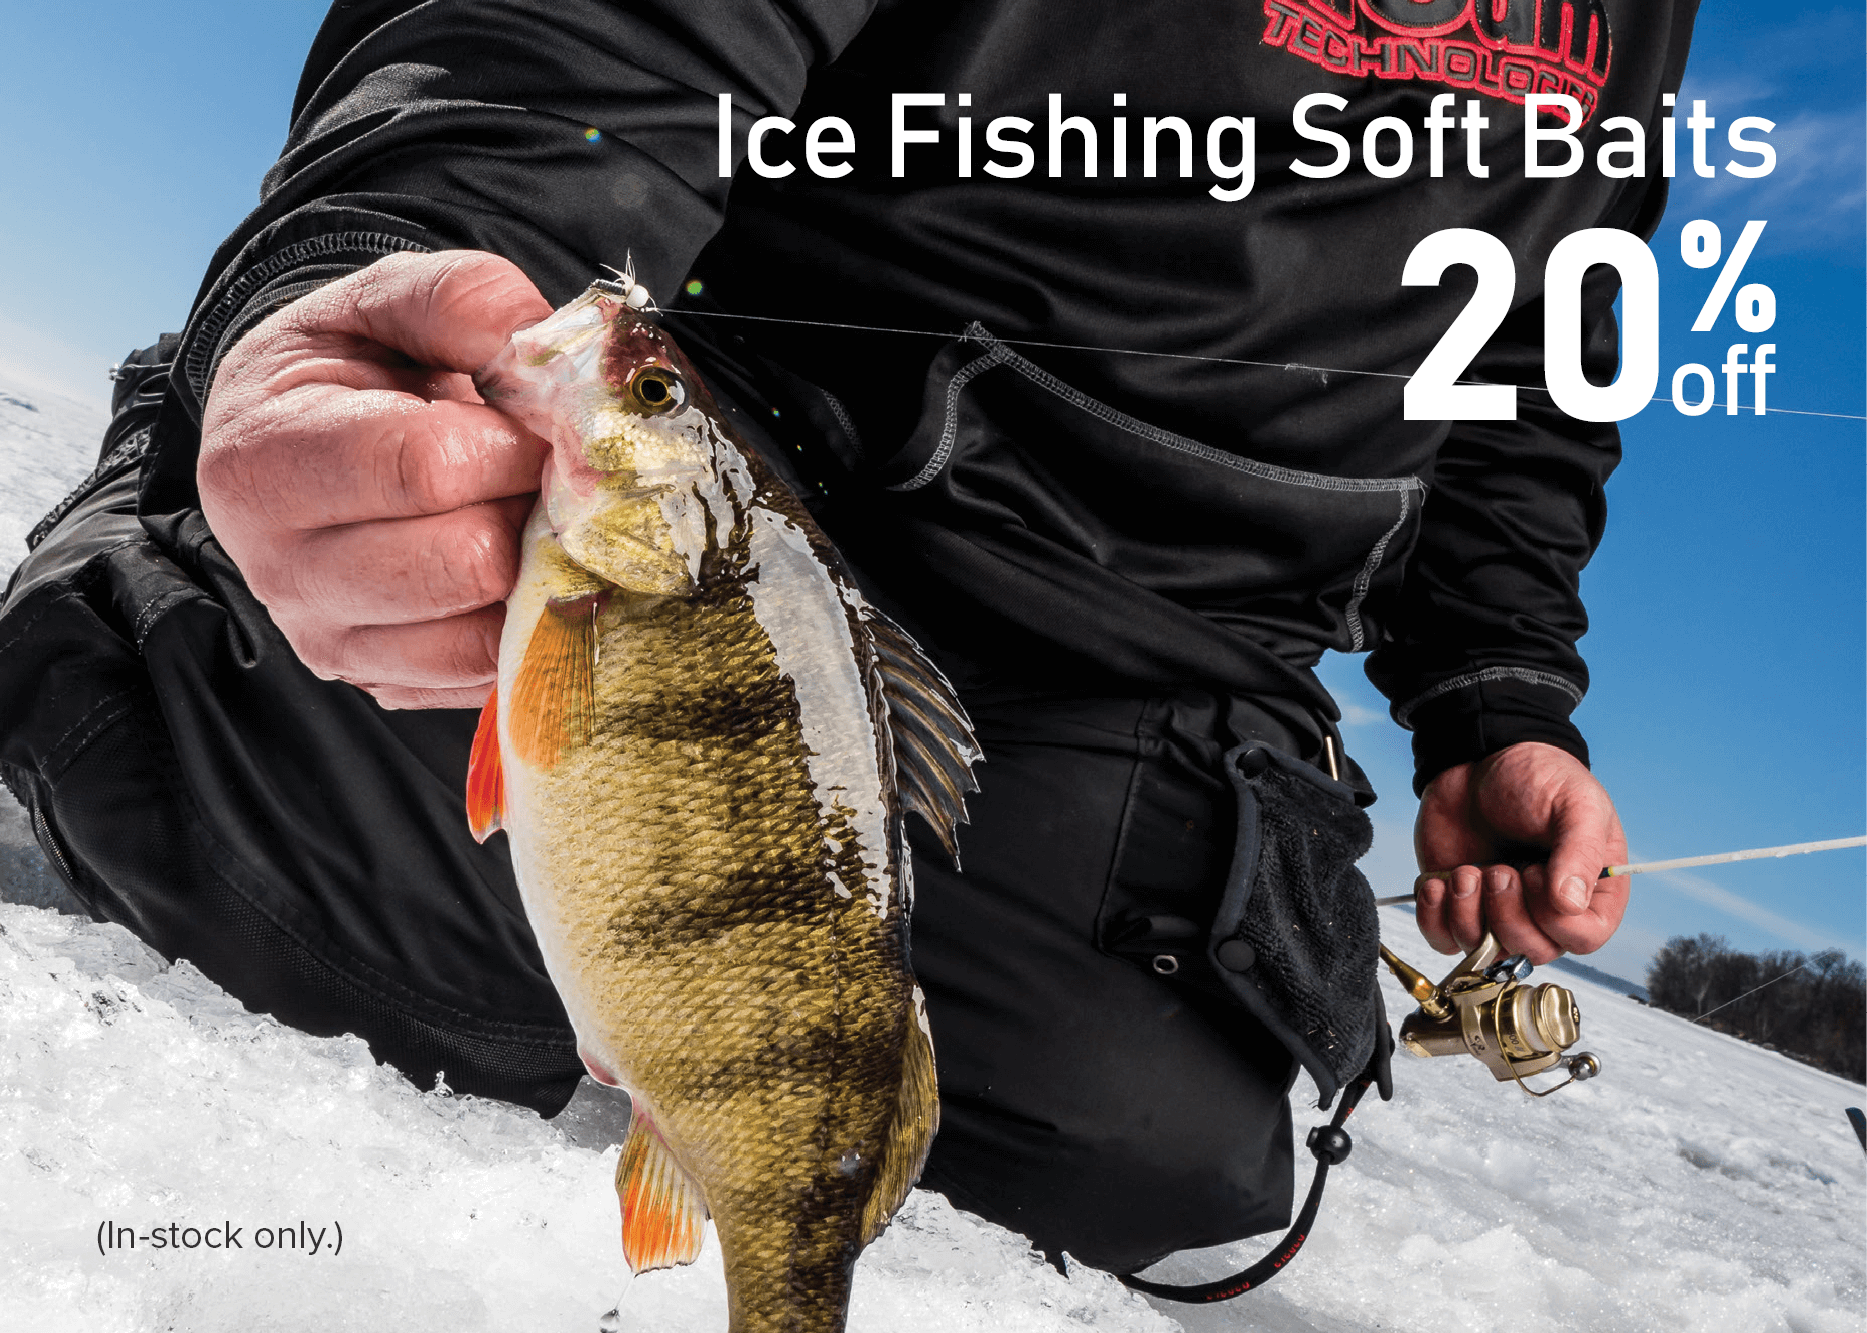 Save 20% on the Ice Fishing Soft Baits!